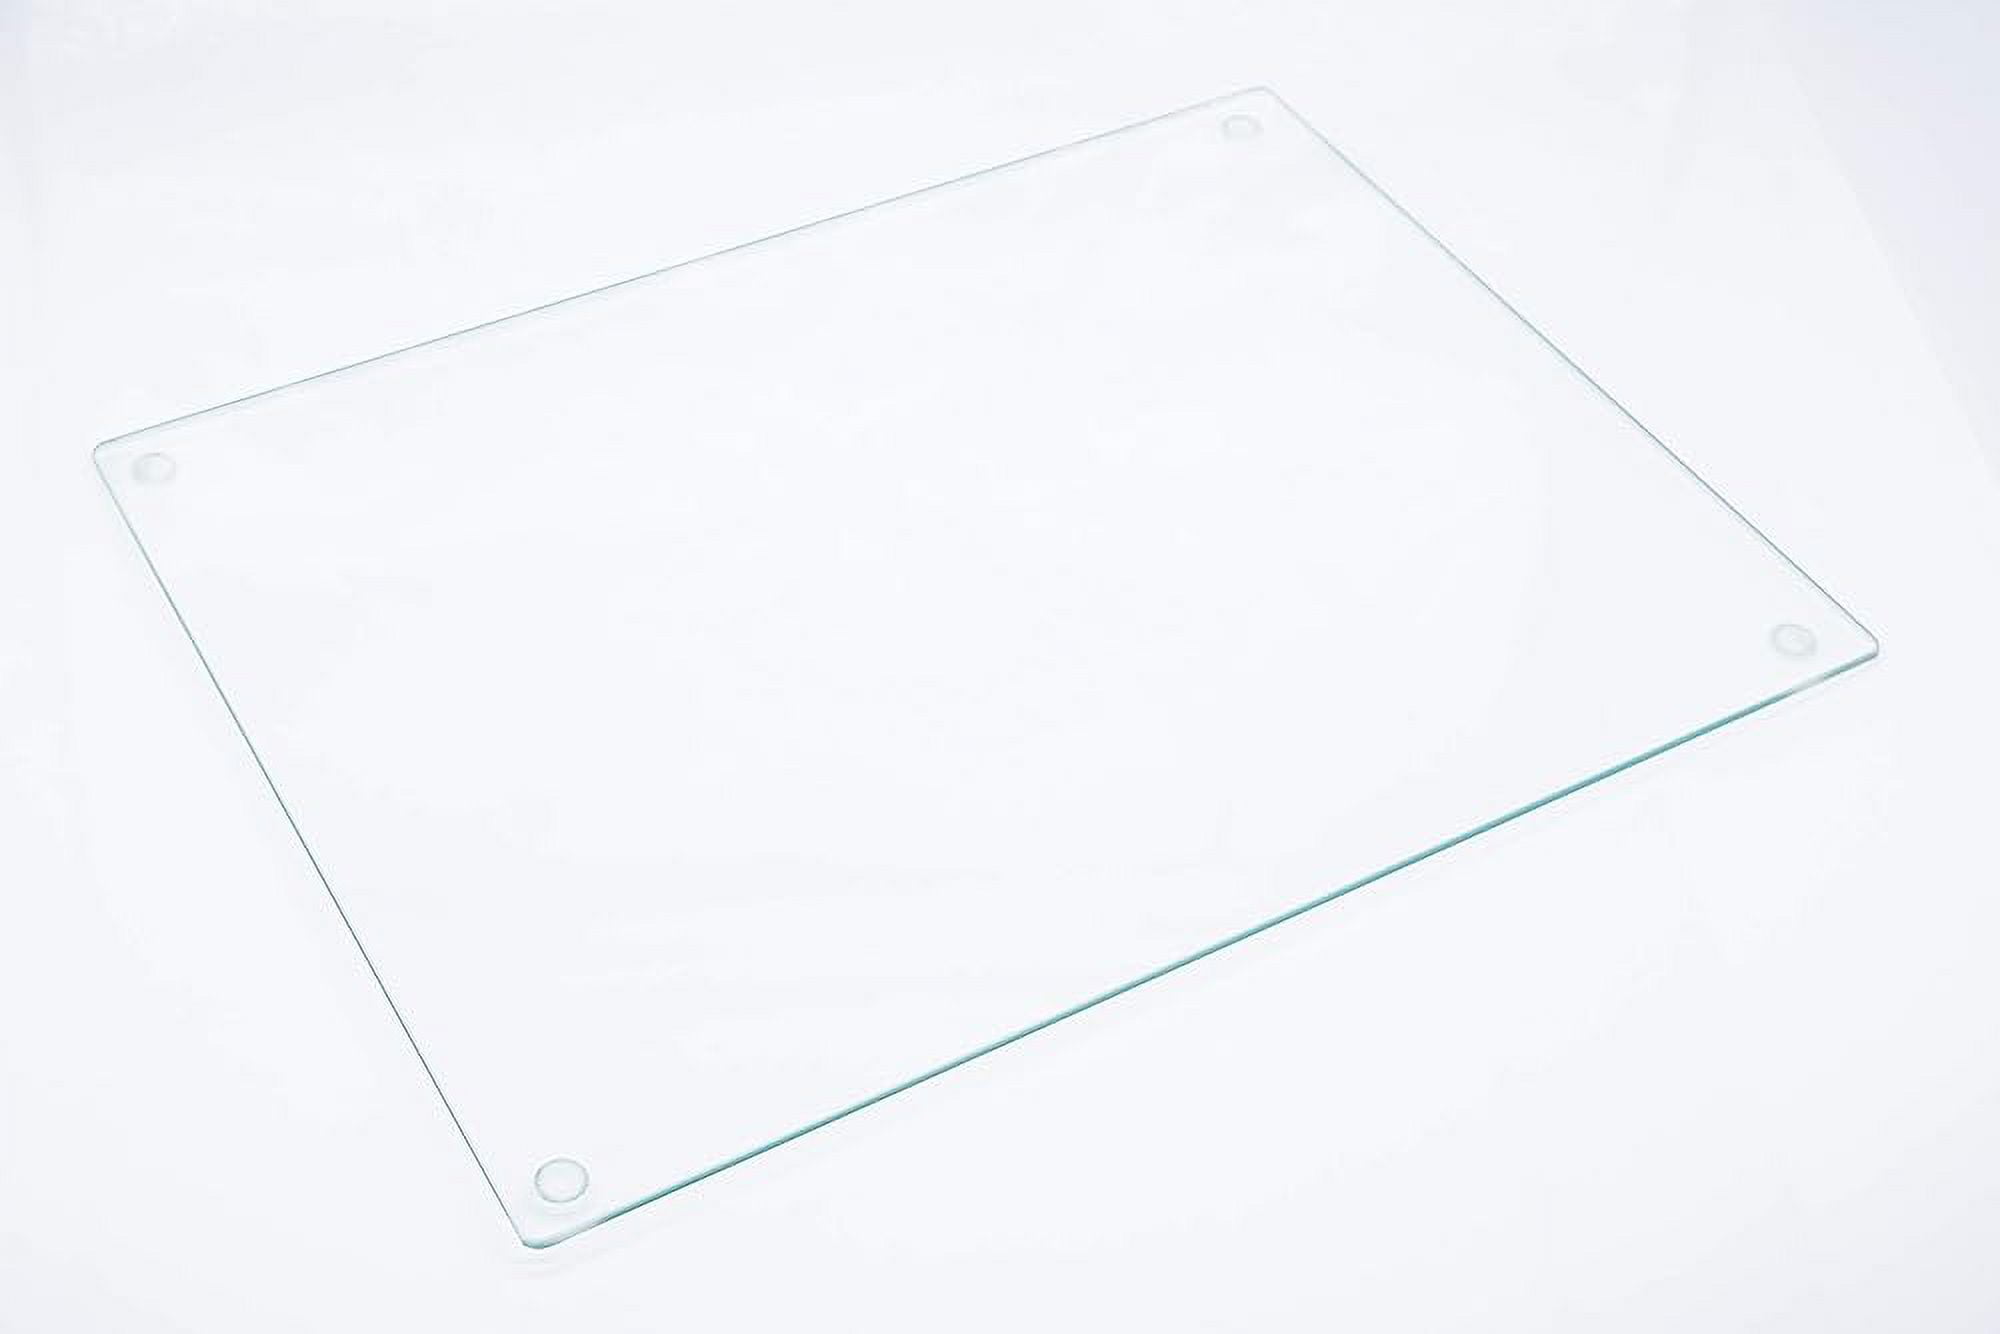 Light in The Dark Tempered Glass Cutting Board - Long Lasting Clear Glass - Scratch Resistant, Heat Resistant, Shatter Resistant, Dishwasher Safe.